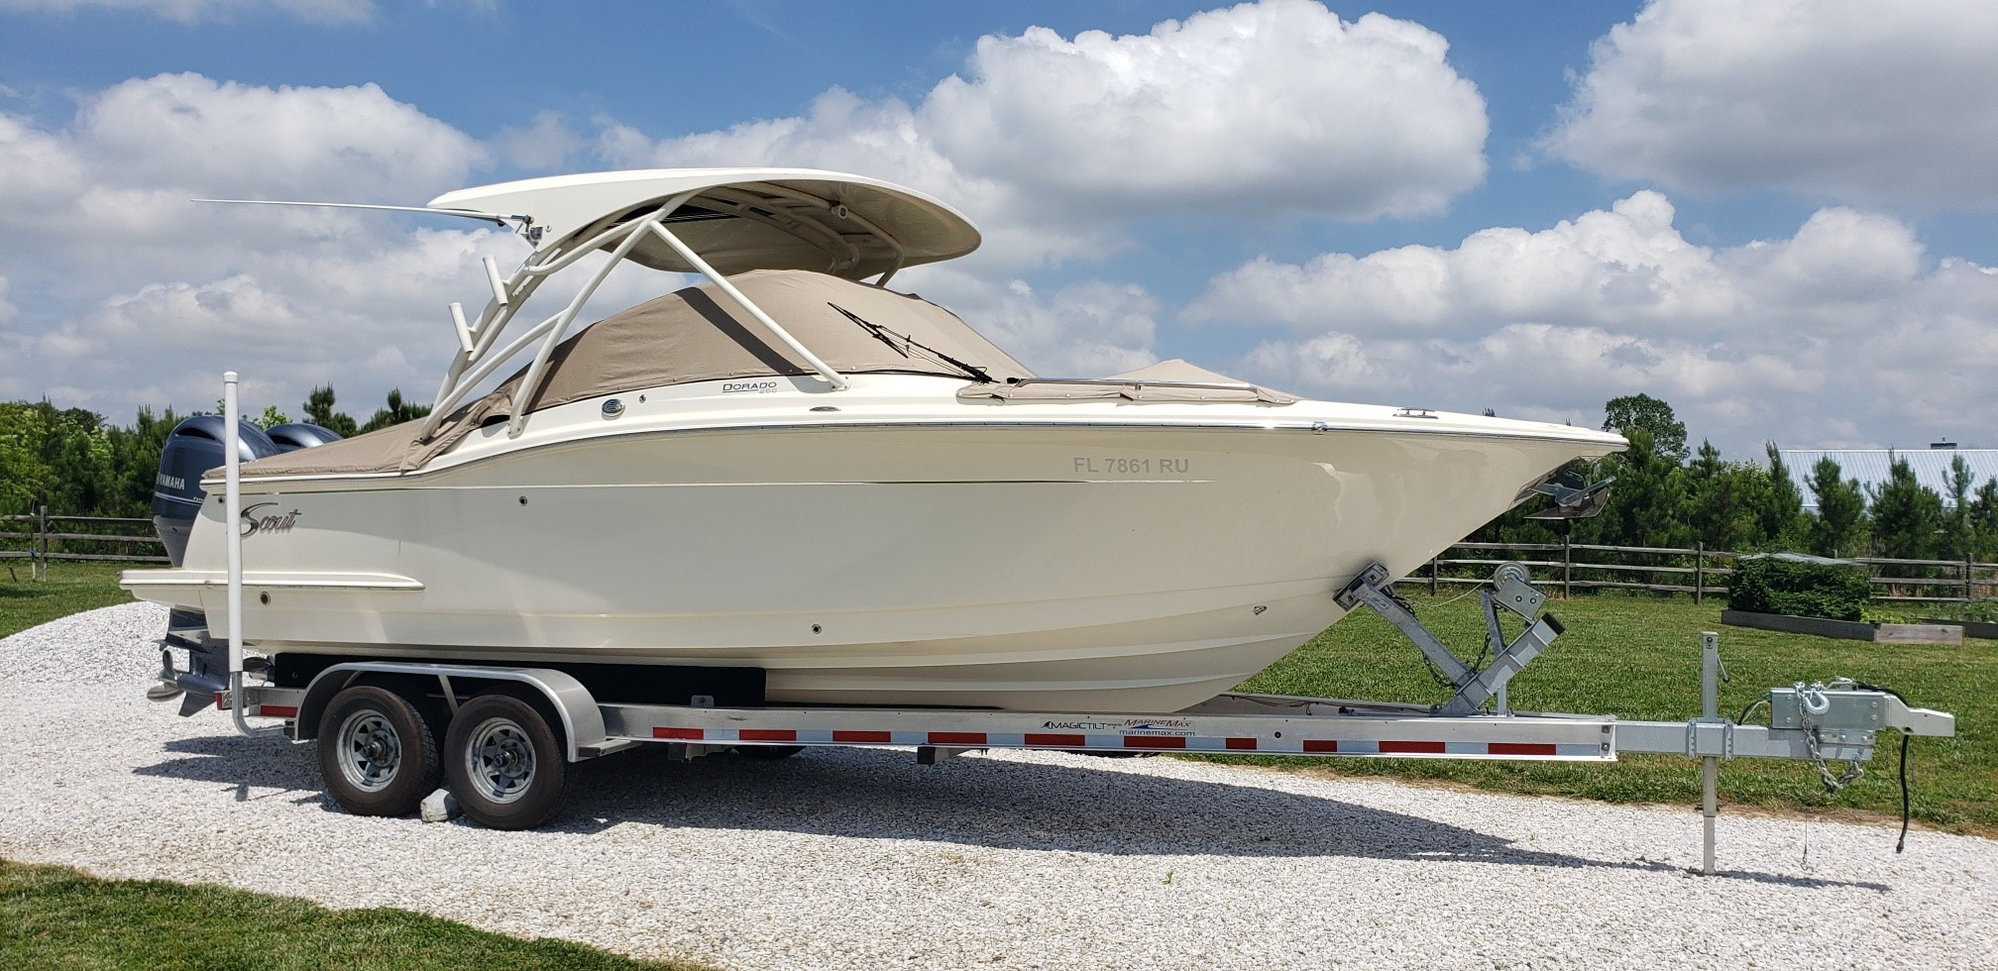 2017 Scout 255 Dorado Just reduced! - The Hull Truth - Boating and ...